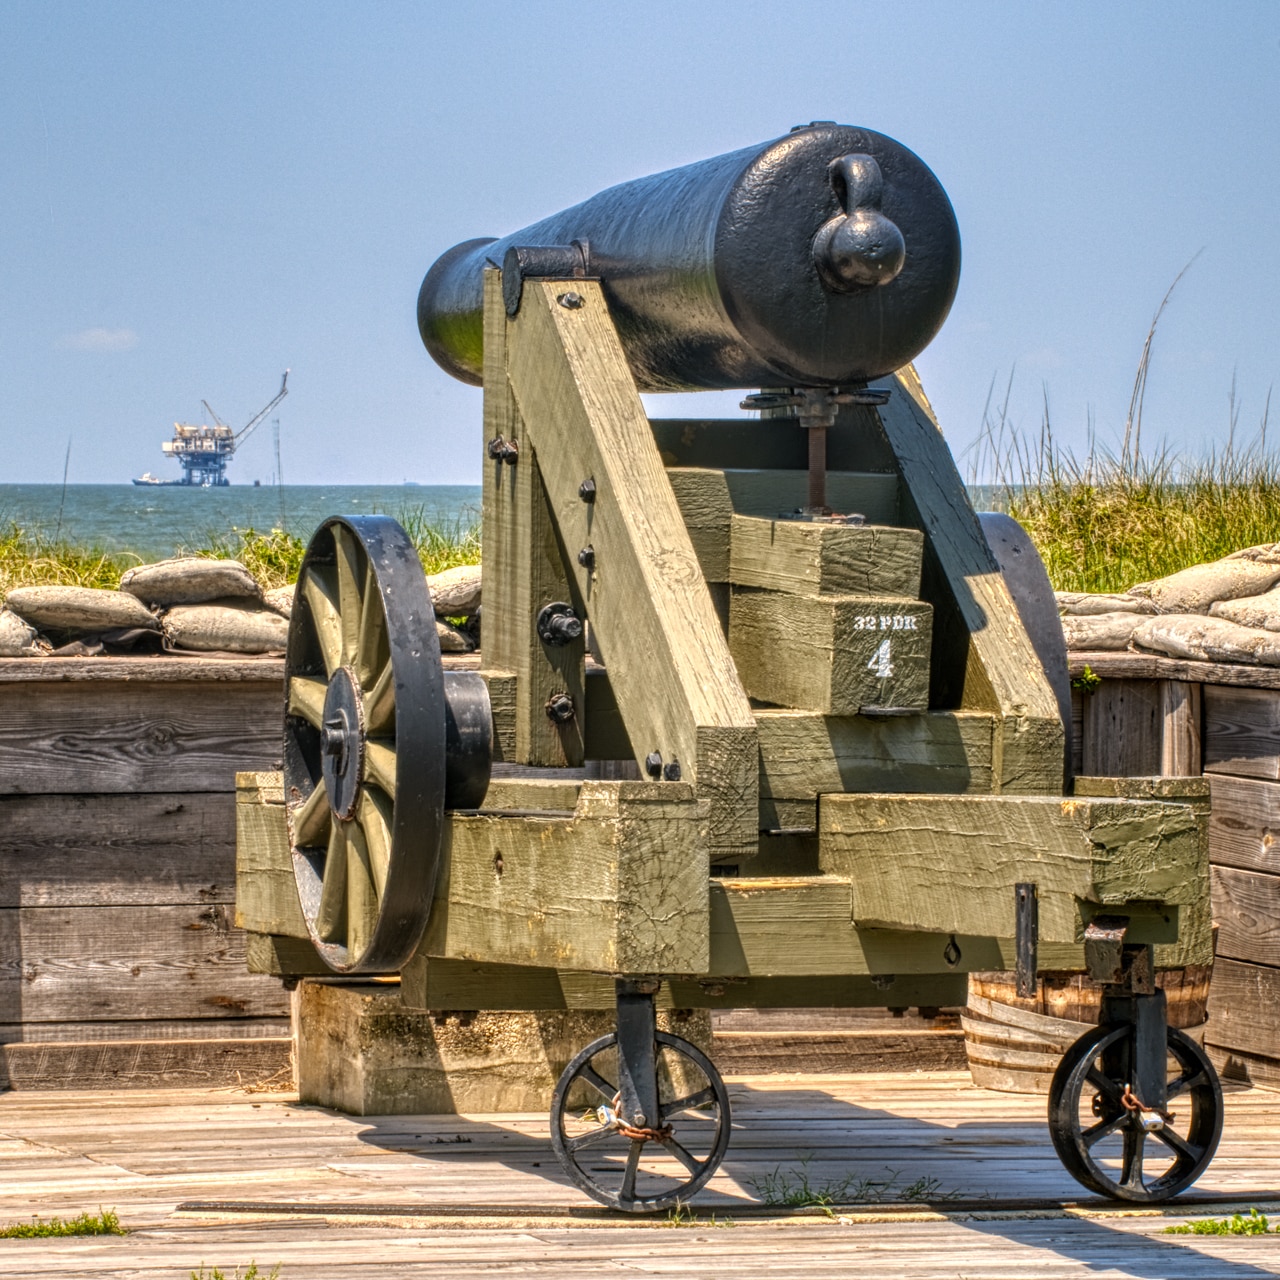 A cannon at Ft. Morgan, on Alabama's Gulf Coast, appears to be aimed at an off-shore drilling platform.